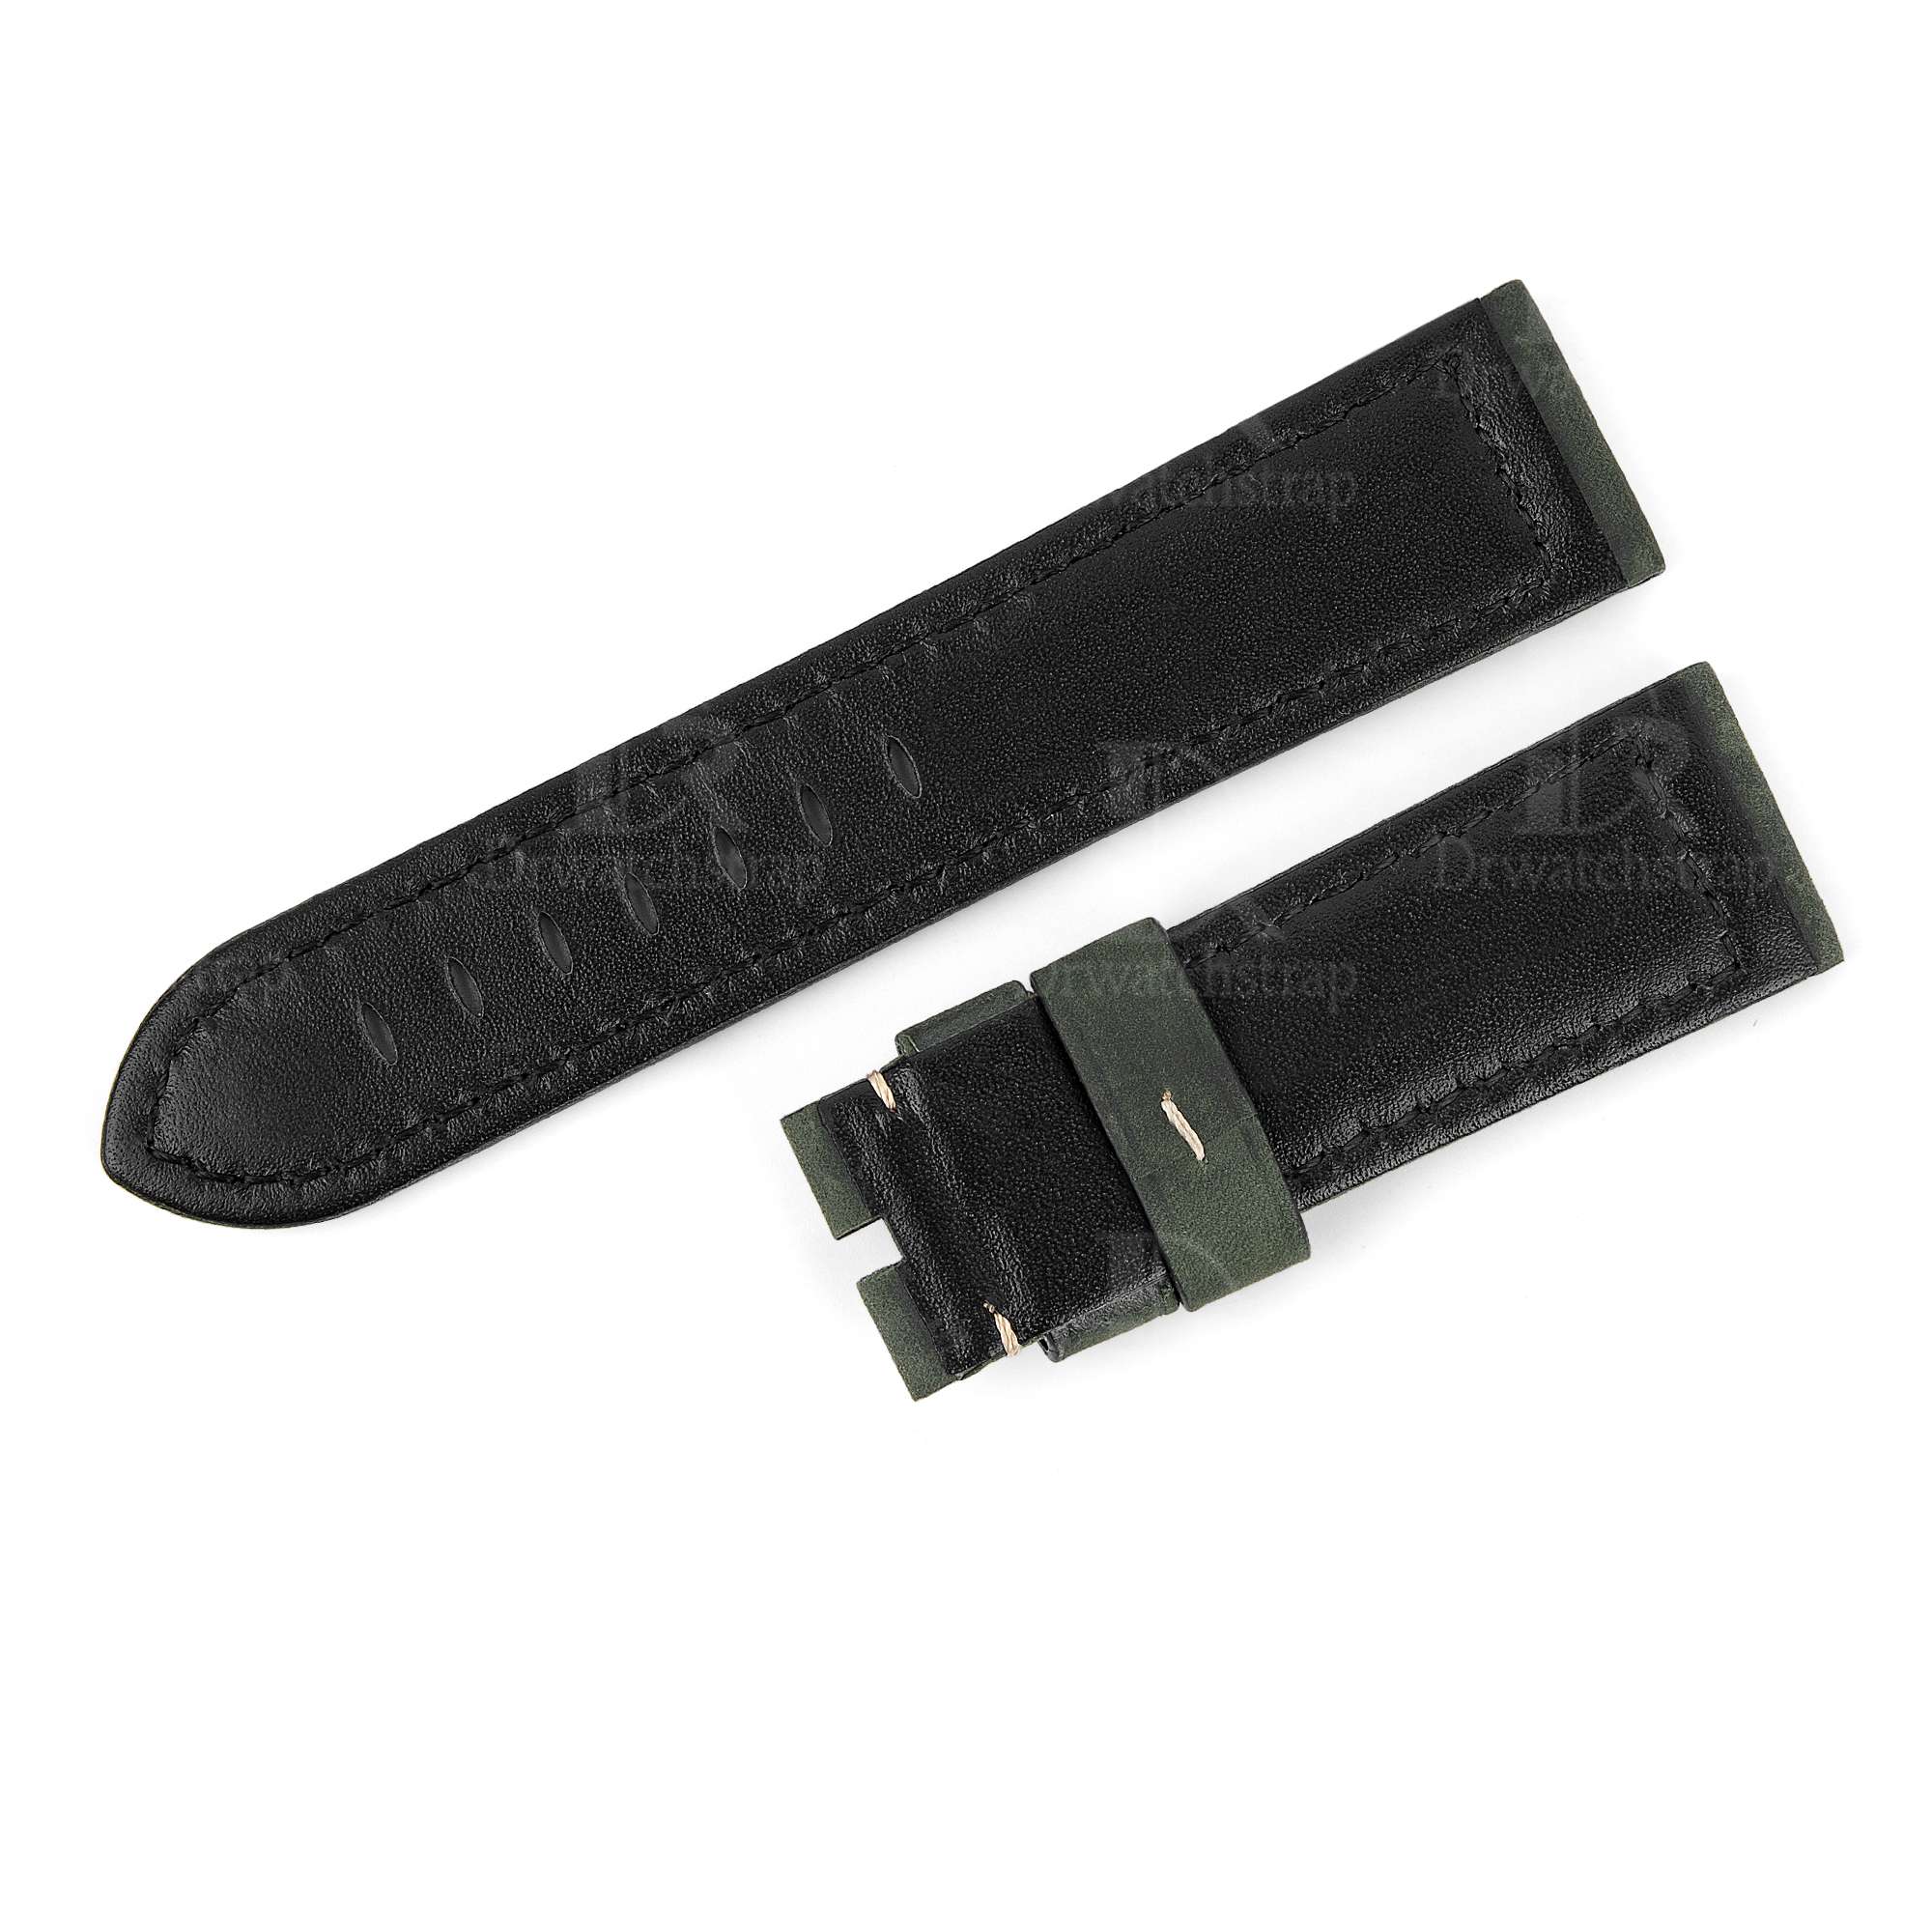 Custom aftermarket OEM best calfskin Oliver green Panerai leather watch straps & watch bands 22mm 24mm 26mm replacement for Panerai Luminor Marina, Radiomir, Submersible luxury watches - Shop the premium best calfskin material leather strap and watch band from Dr watchstrap at a low price